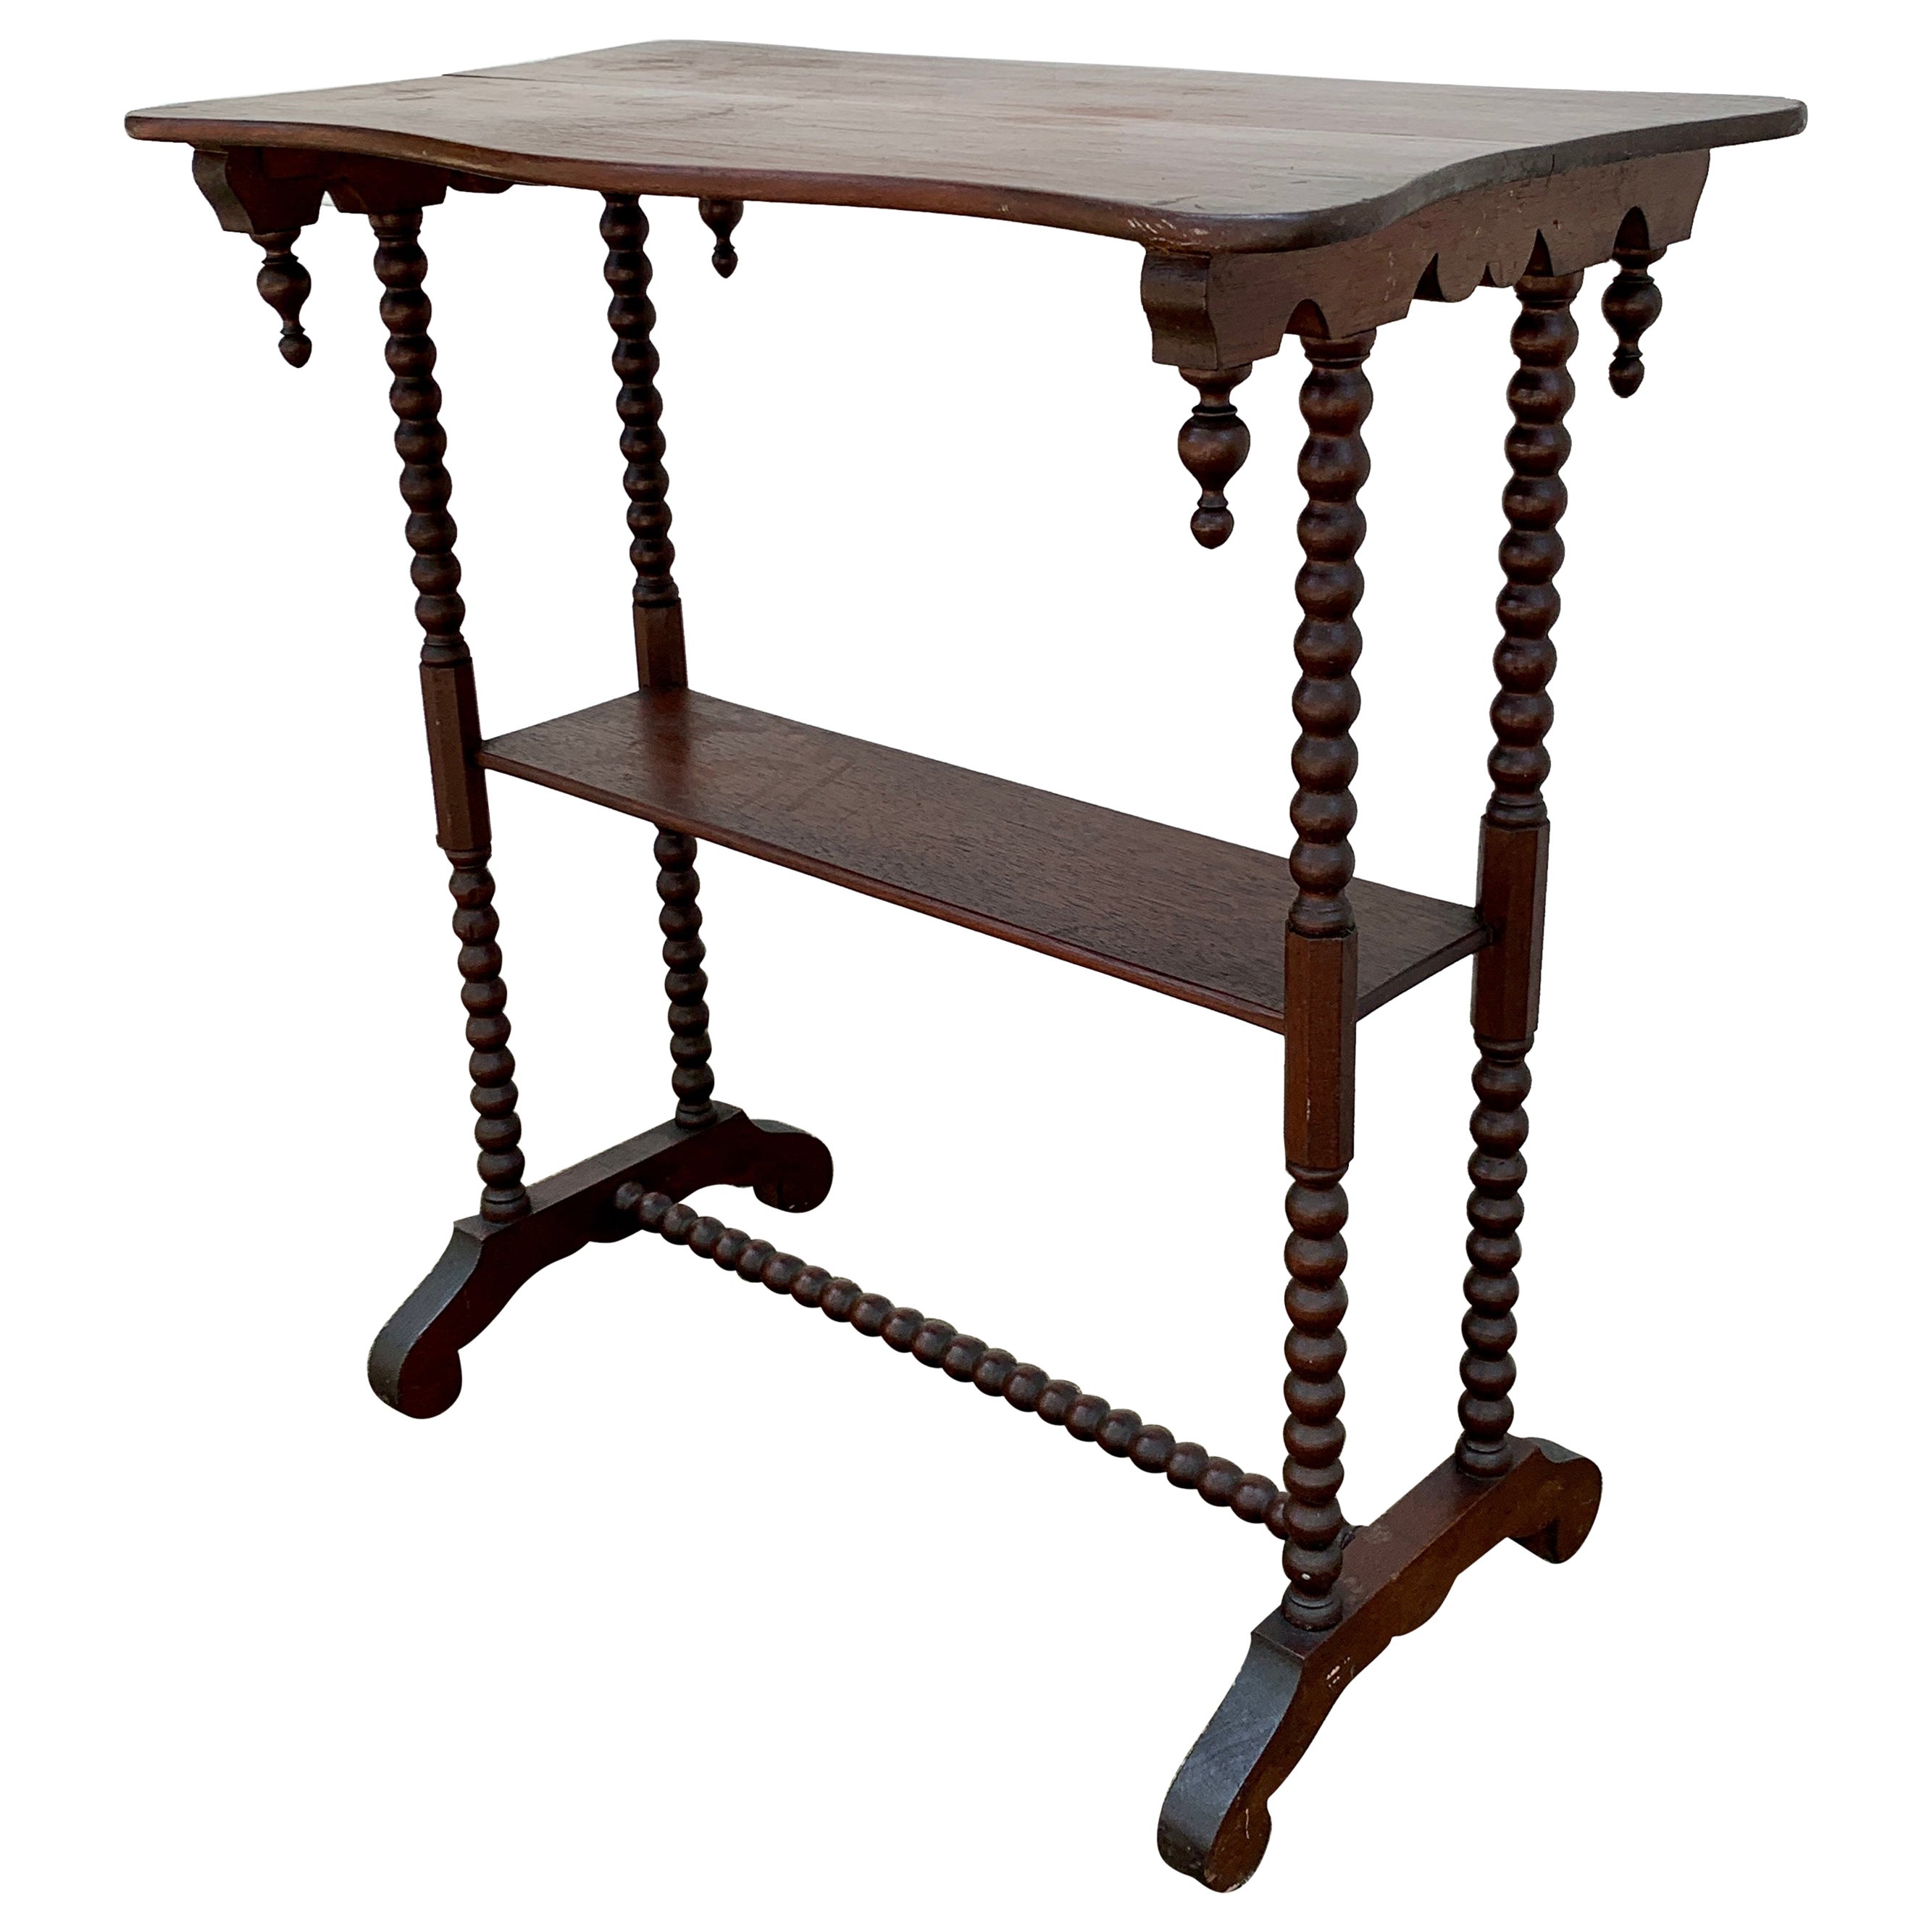 Late 19th Century American Victorian Walnut Side Table